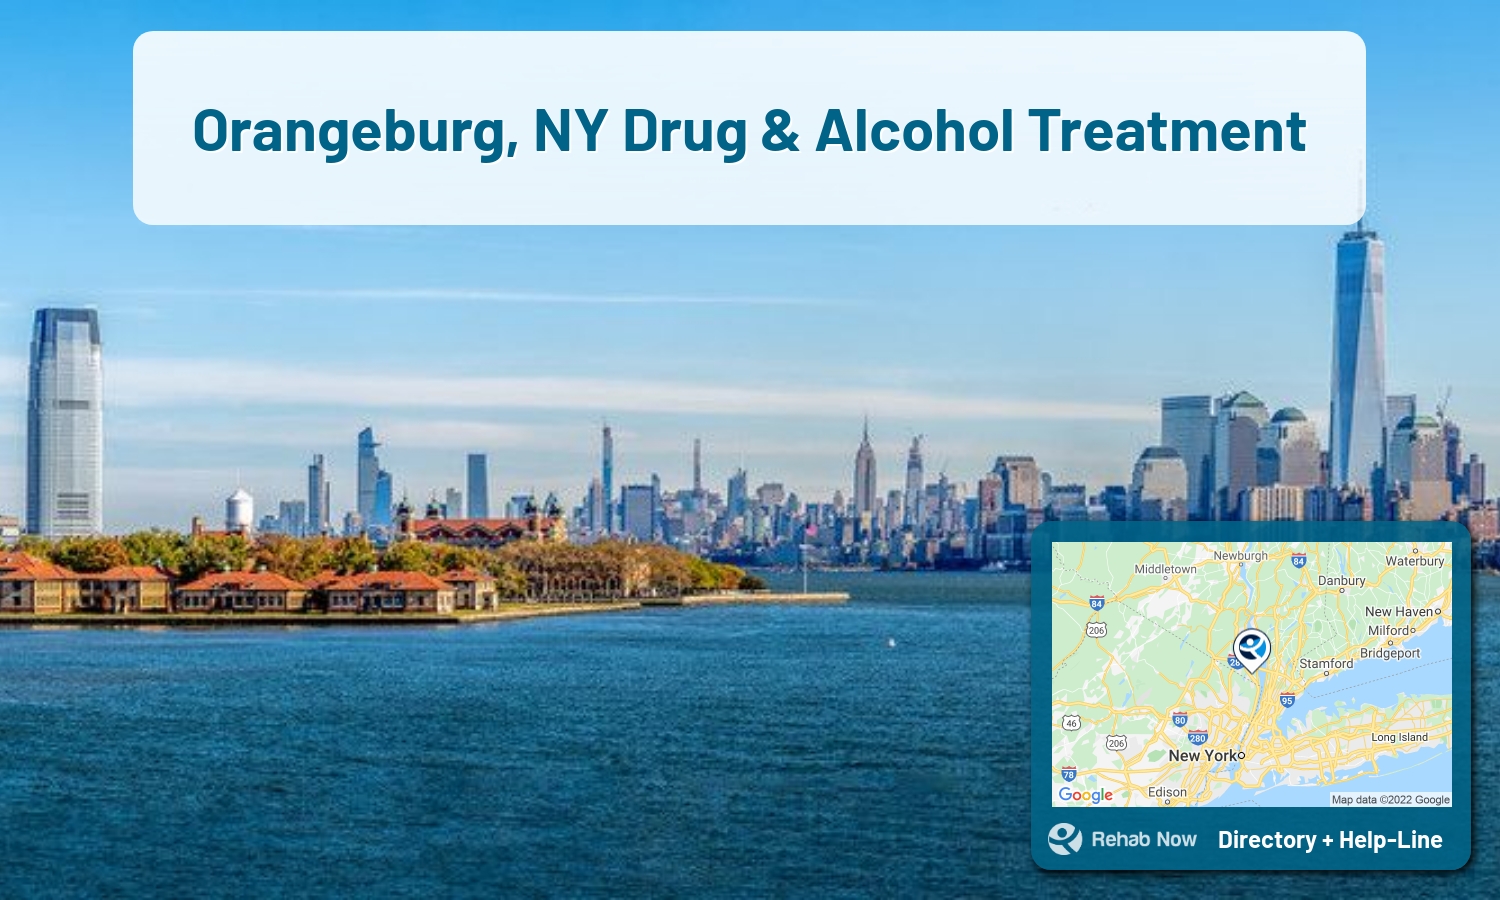 Let our expert counselors help find the best addiction treatment in Orangeburg, New York for you or a loved one now with a free call to our hotline.